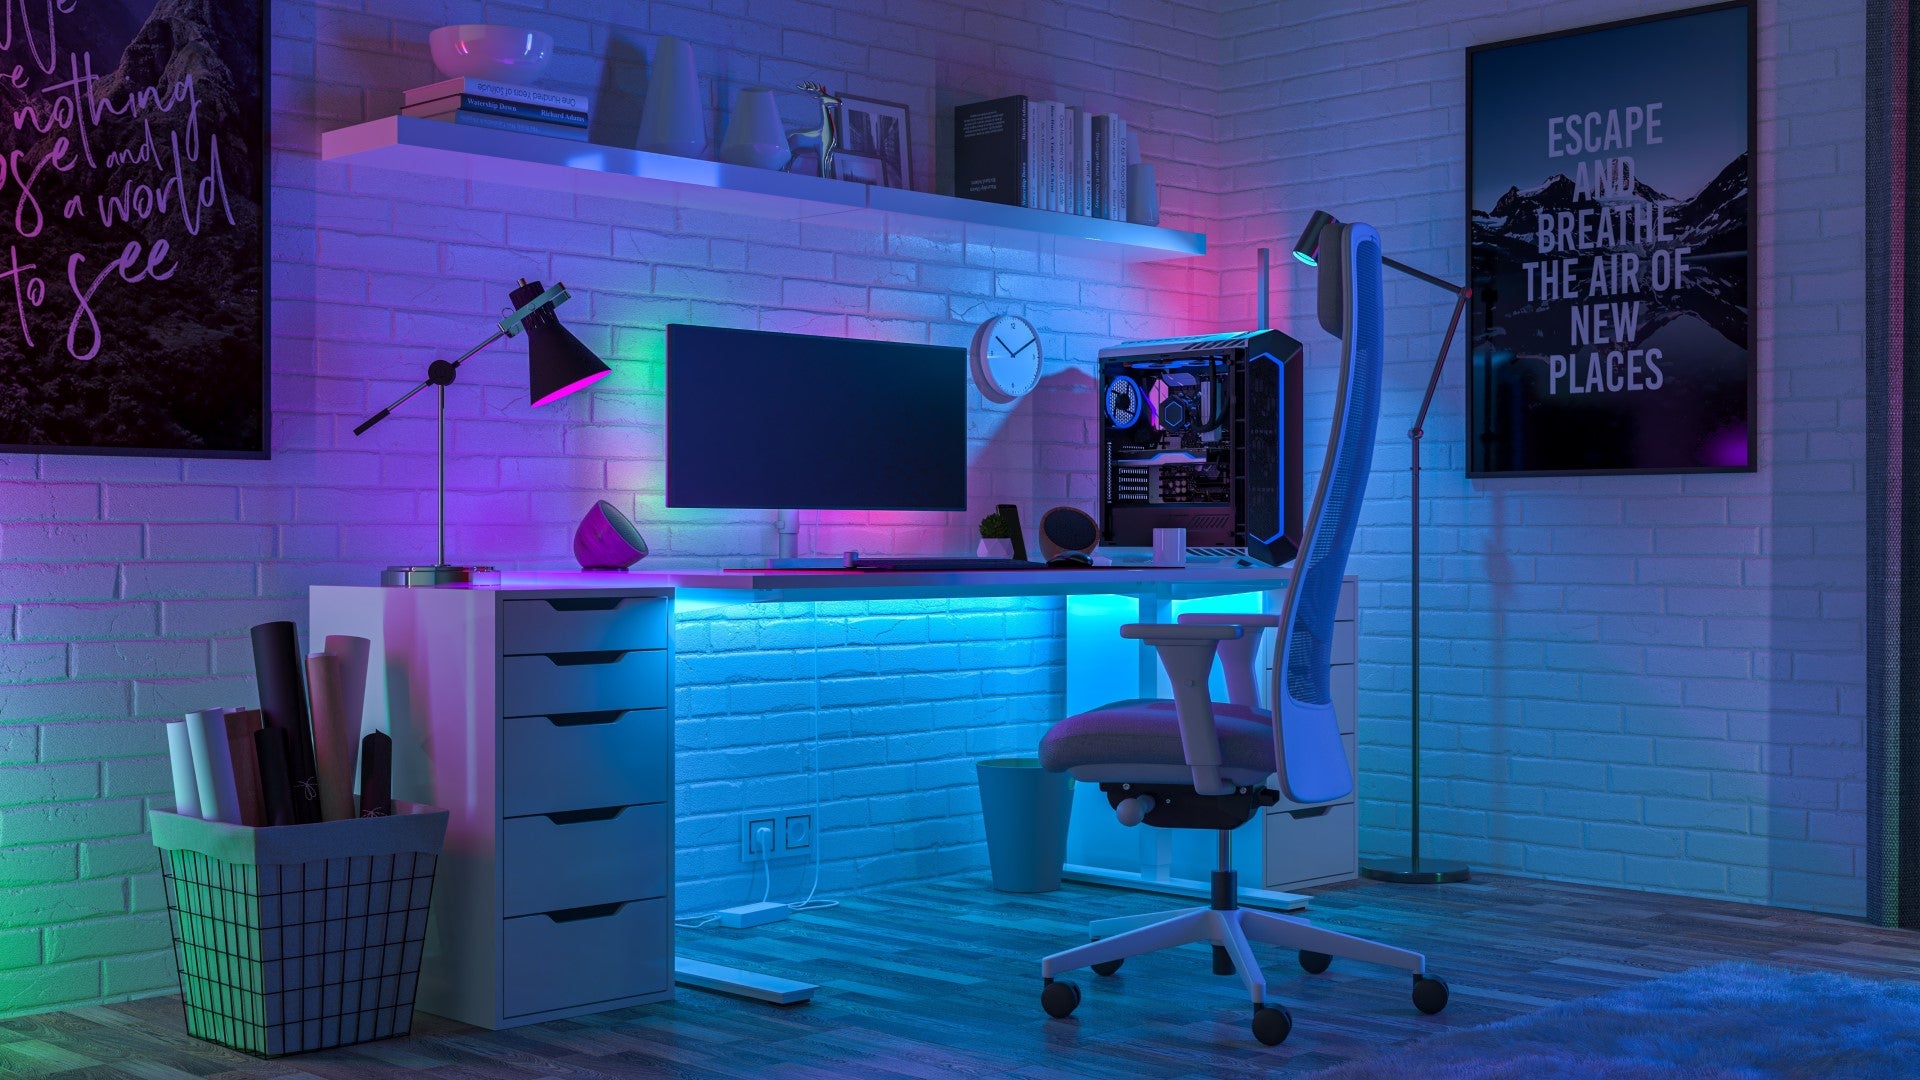 How to Arrange Your Gaming Desk with Light